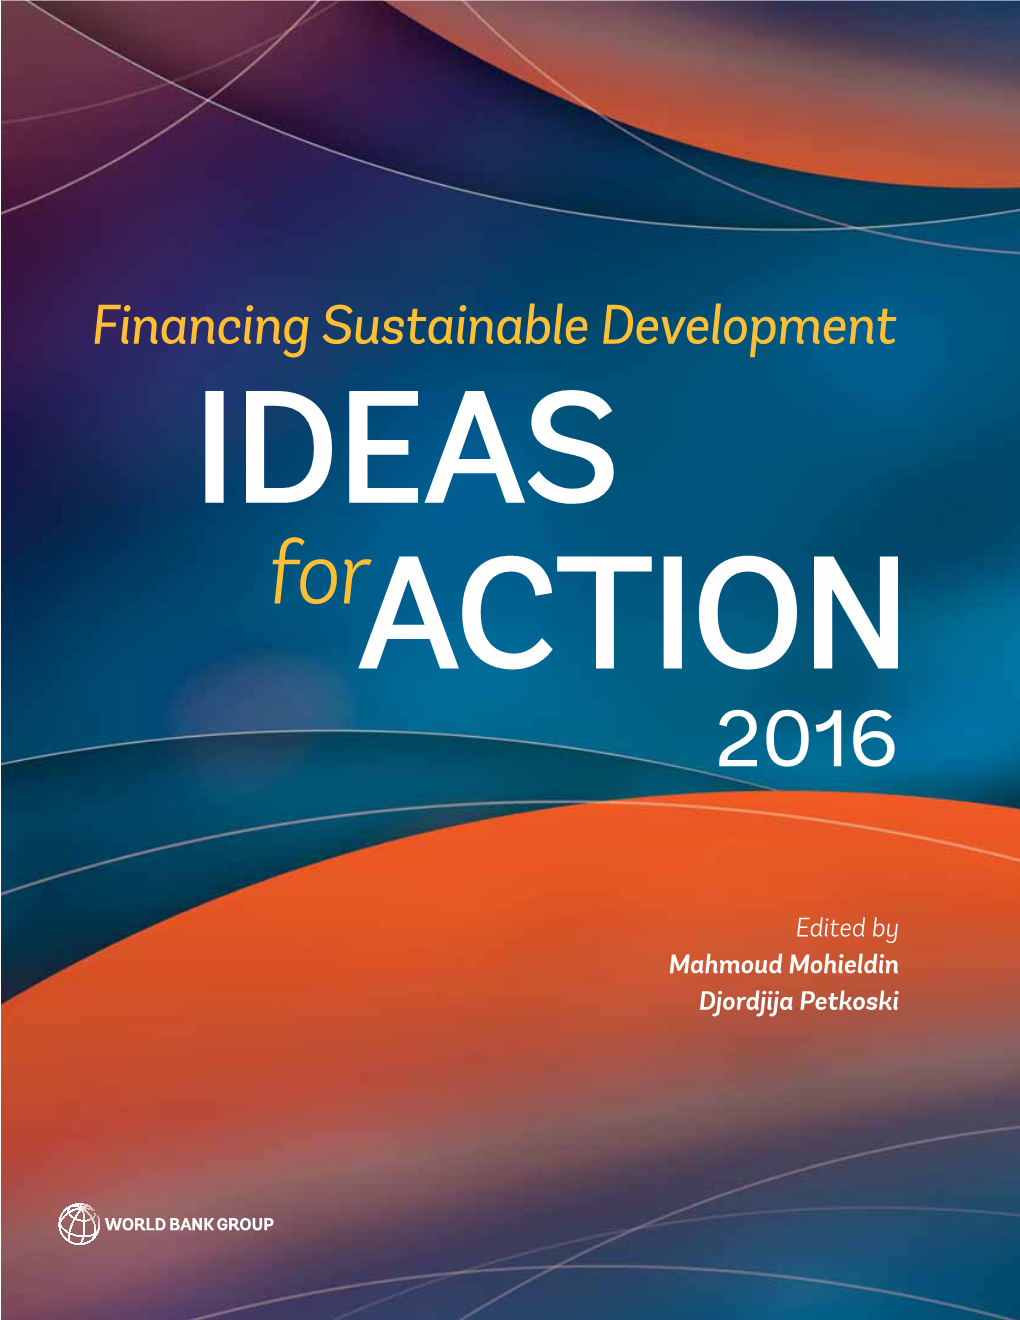 Financing Sustainable Development IDEAS Foraction 2016